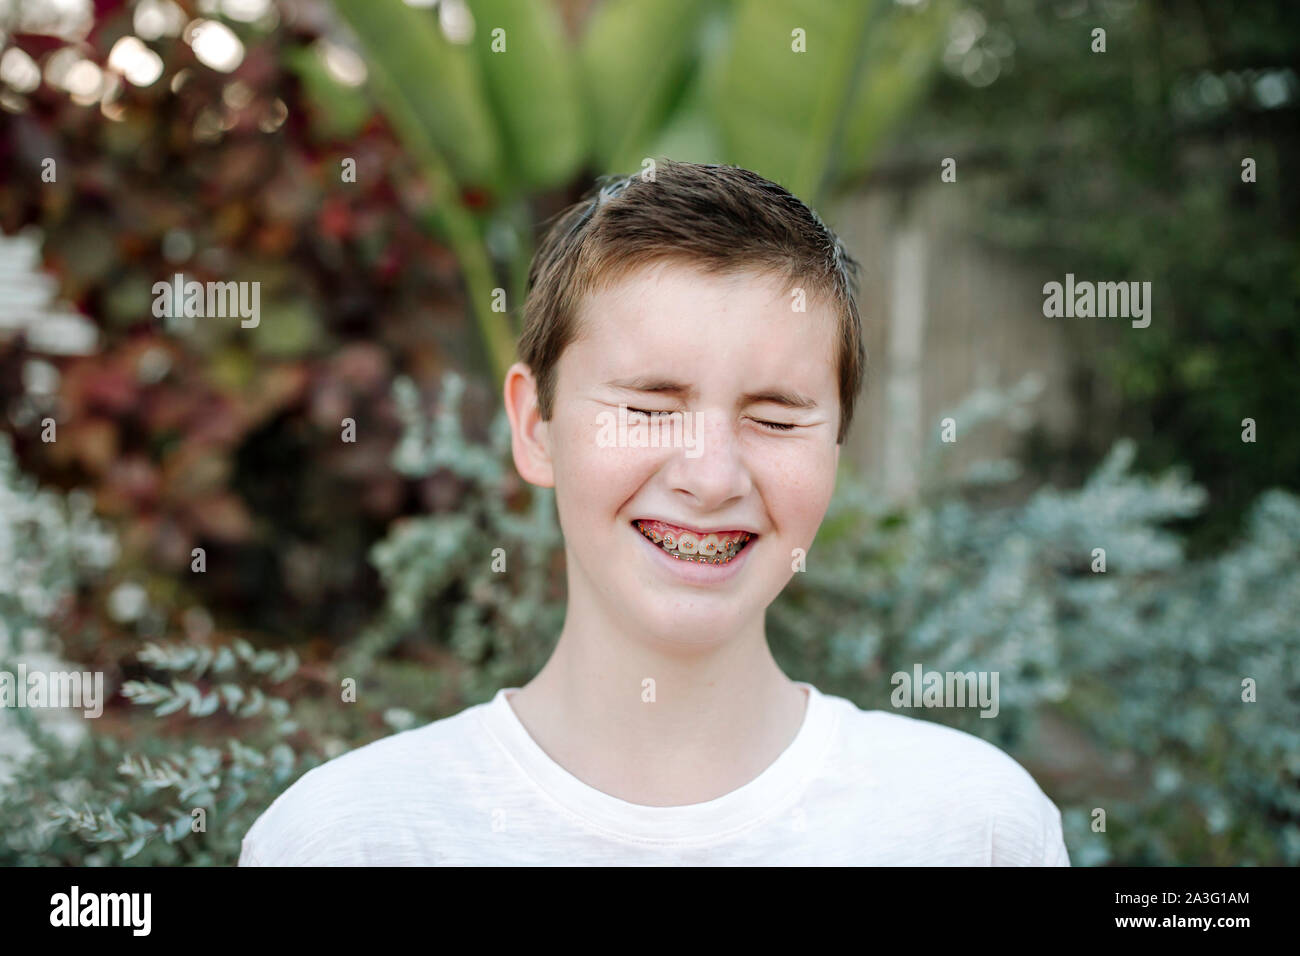 Laughing preteen boy with short hair and braces near lush plants Stock Photo